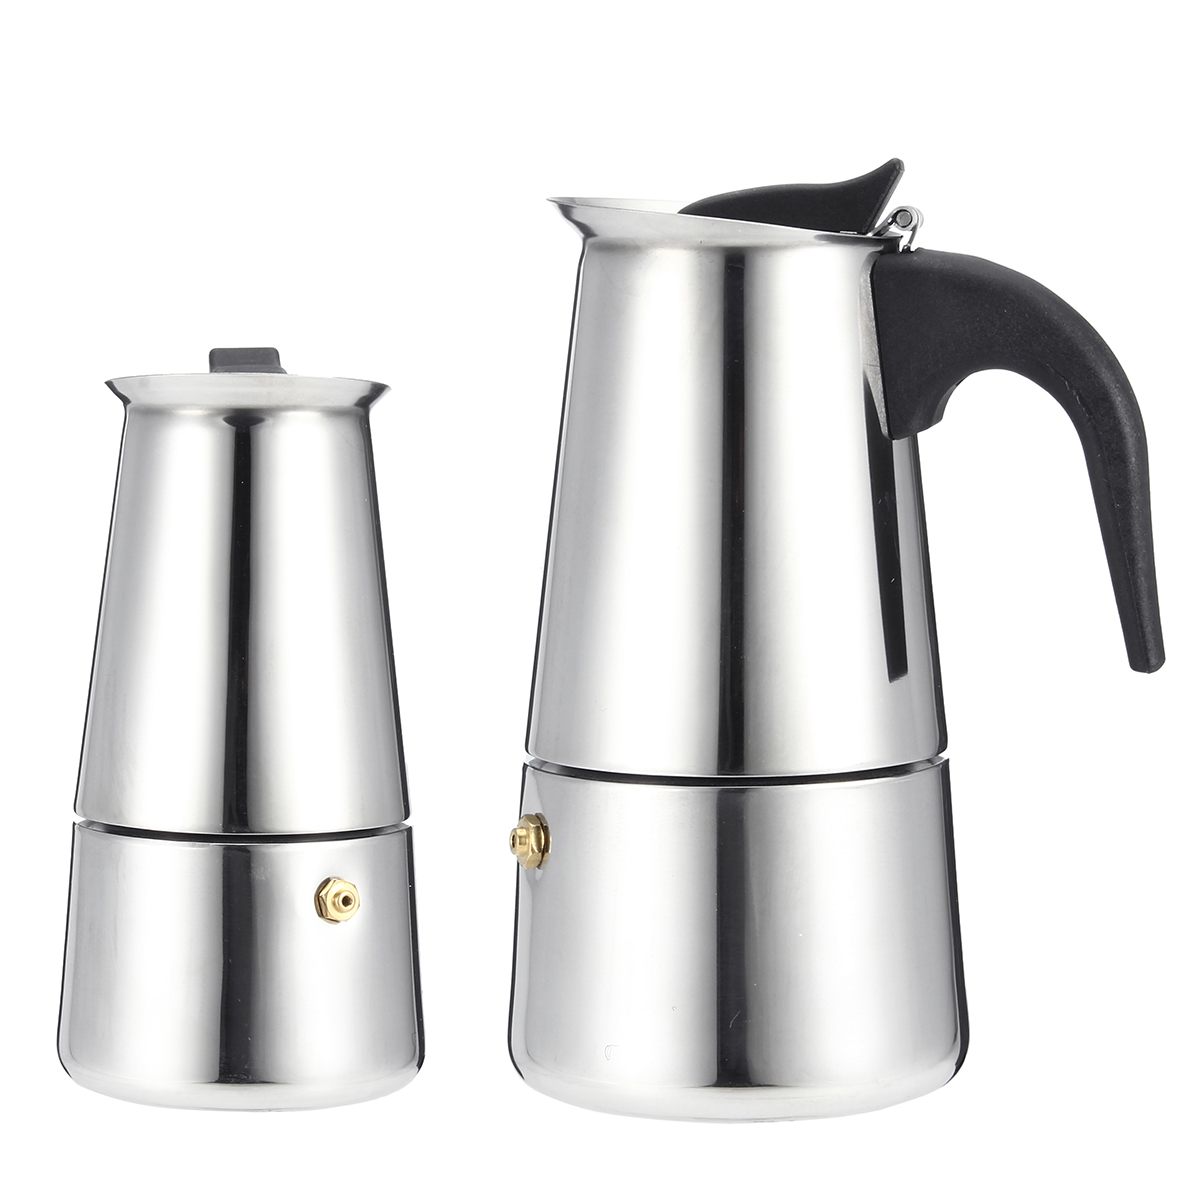 200/450ml Stainless Steel Coffee Pot Mocha Espresso Latte Percolator Coffee Maker with Electric stove Filter Drink Cafetiere